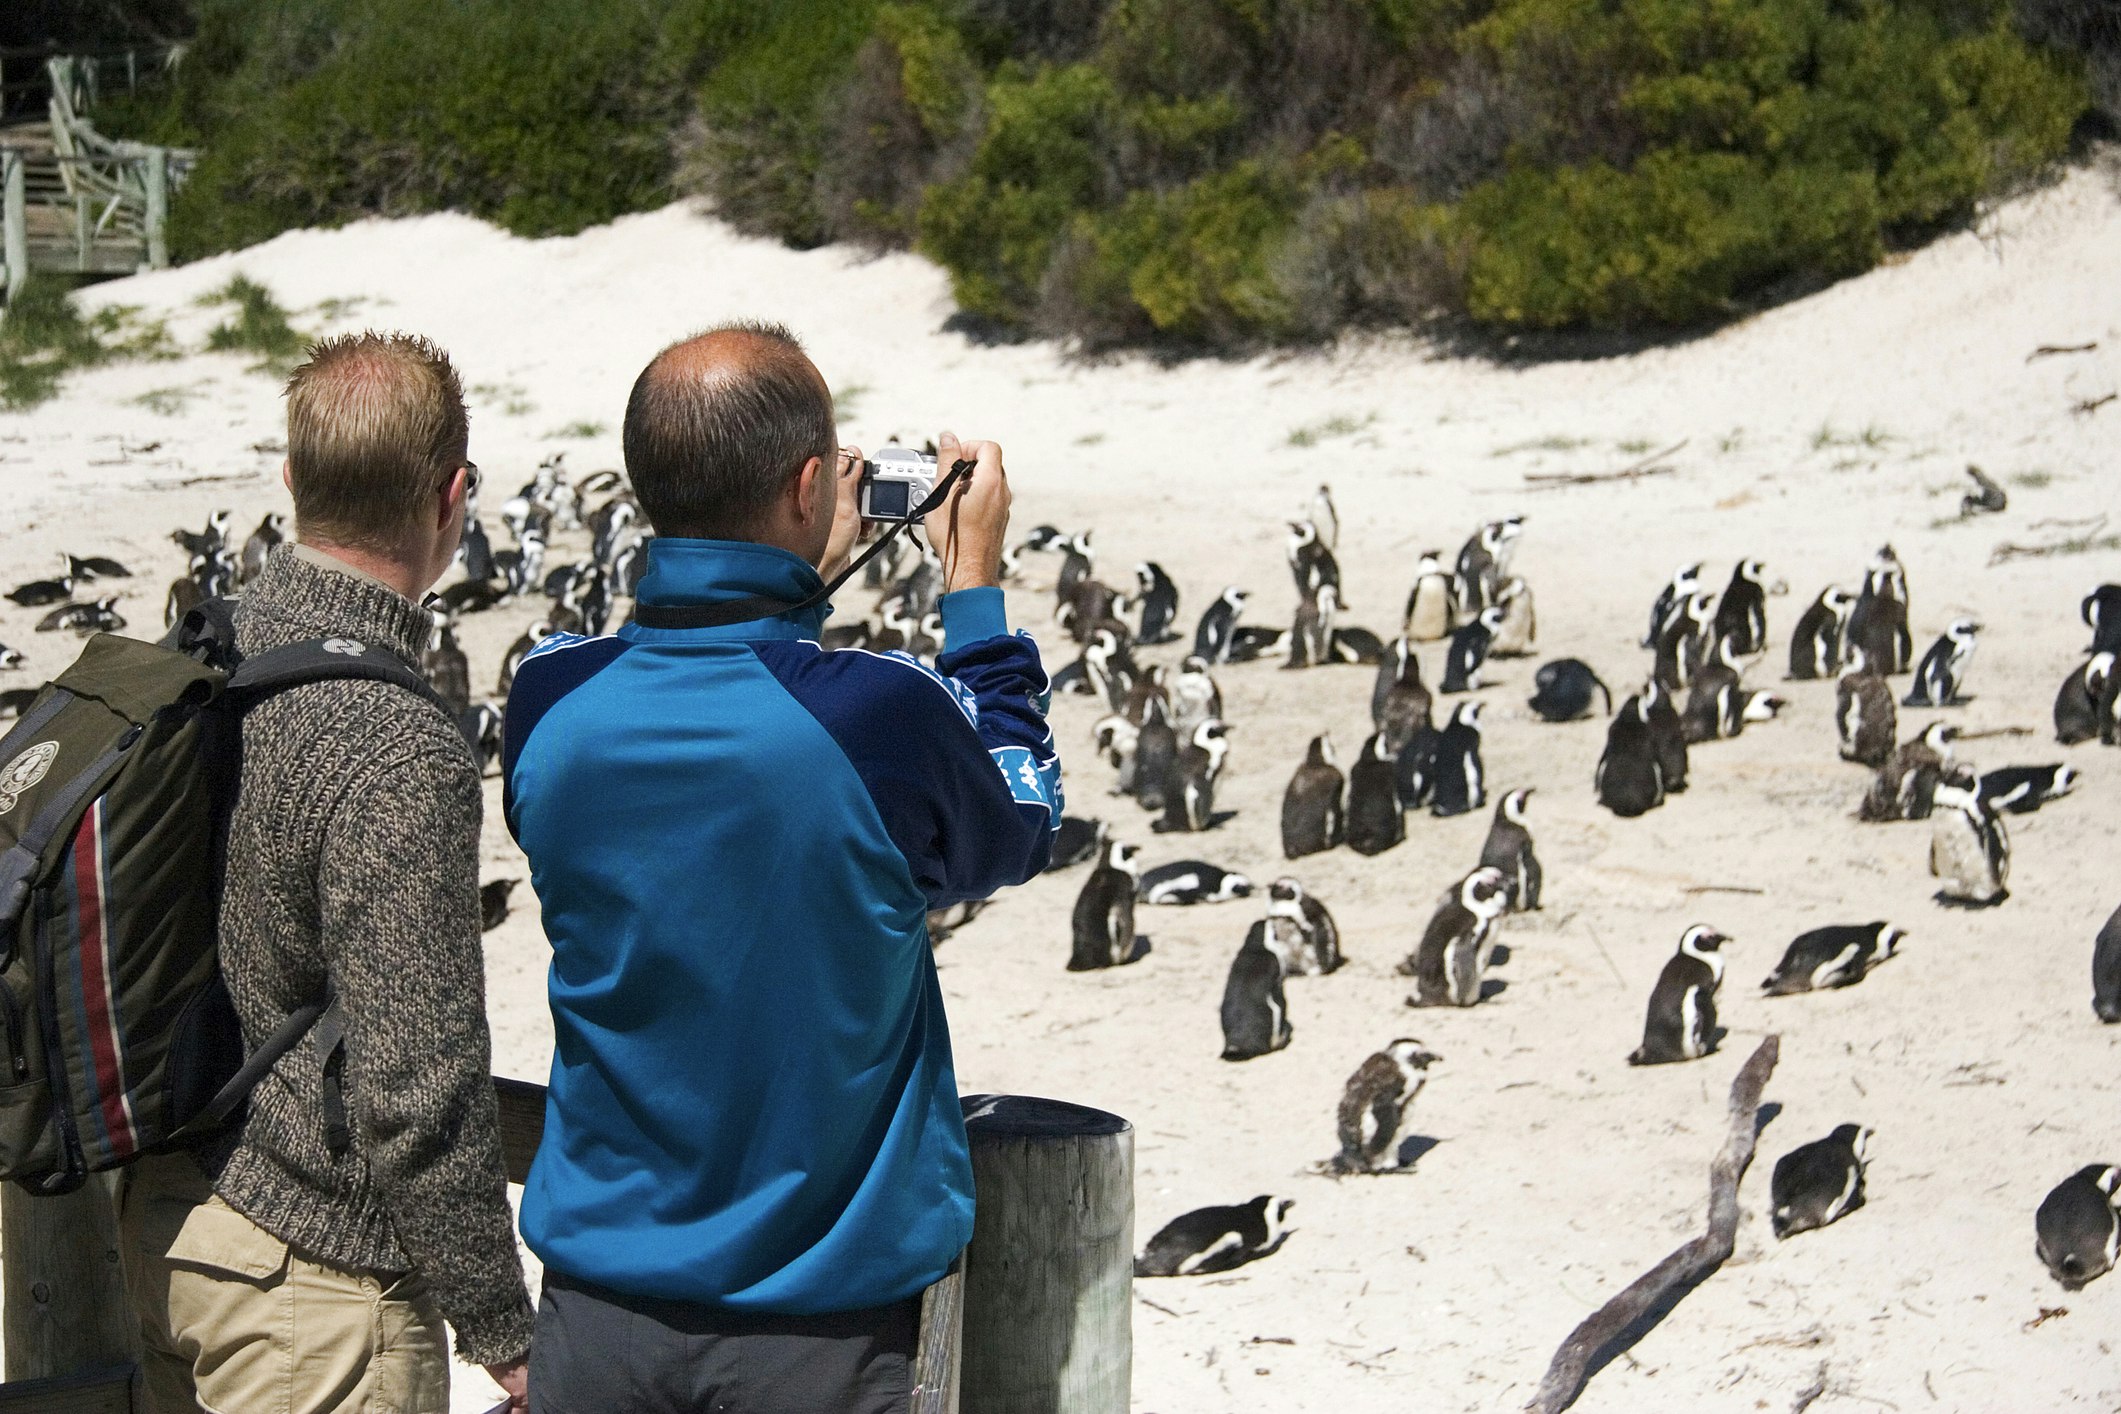 Men observing and photographing colony of penguins at Cape Peninsula.